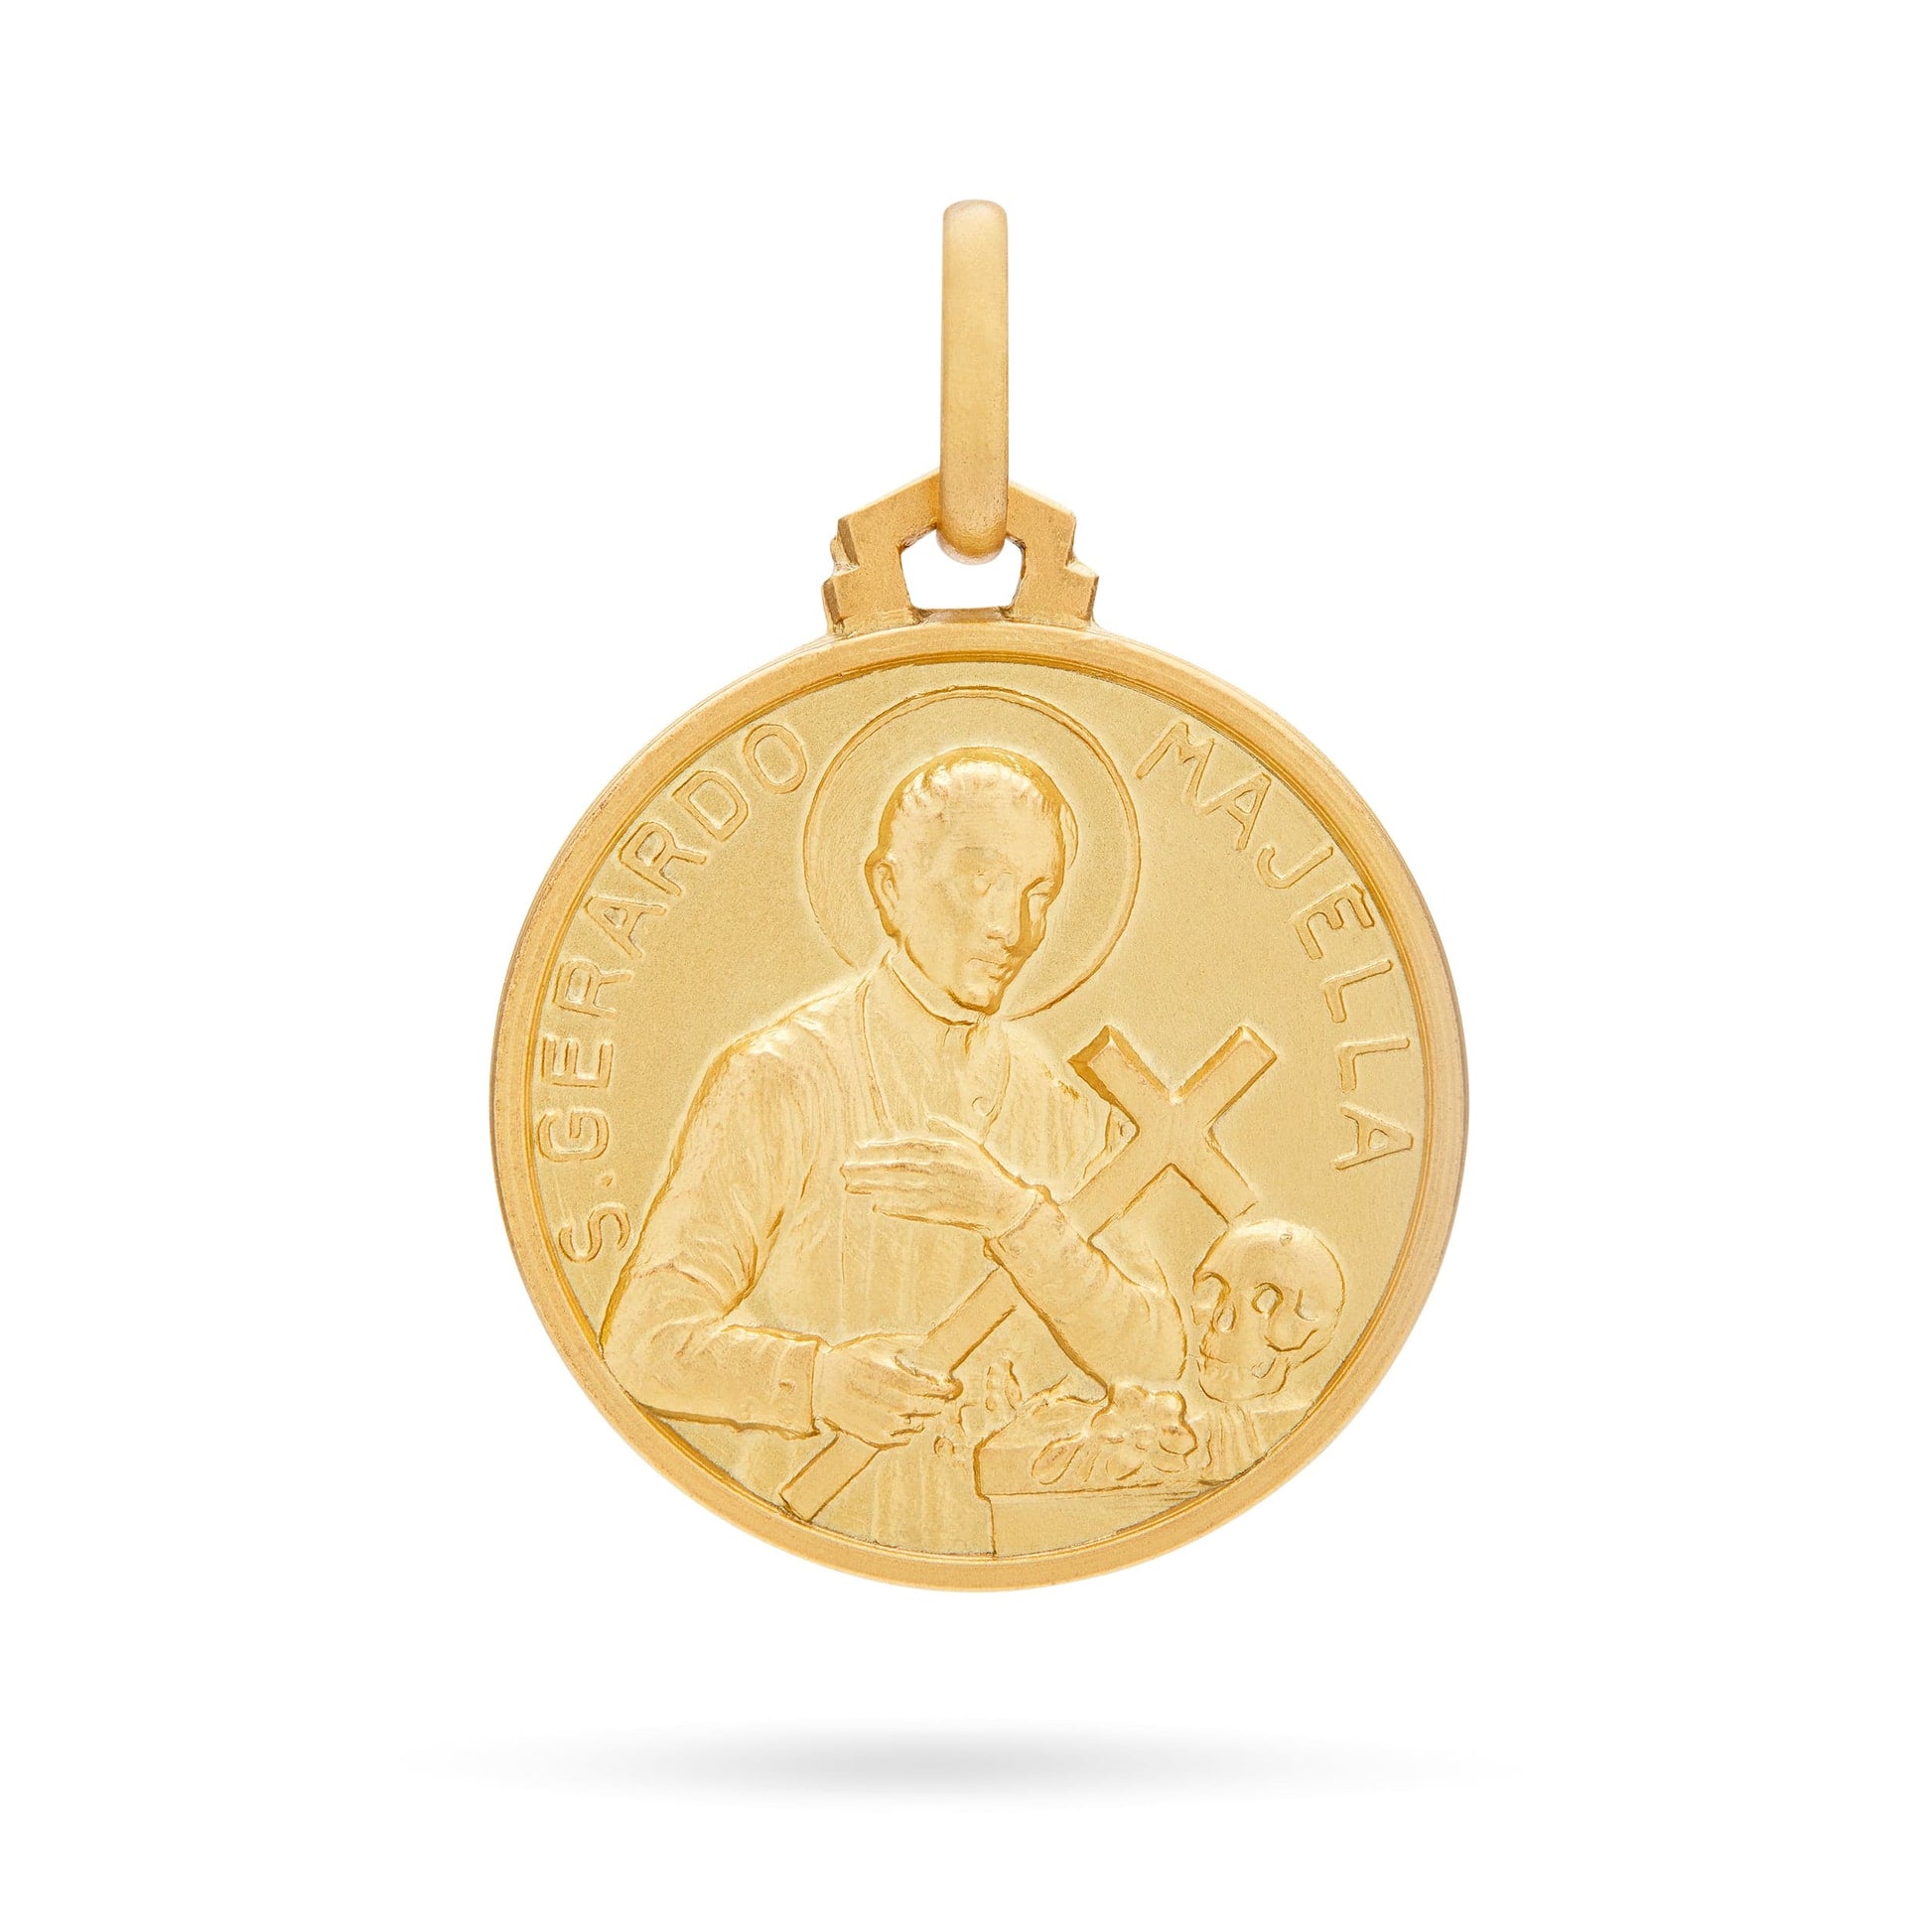 MONDO CATTOLICO Jewelry 18 mm (0.70 in) Saint Gerard Yellow Gold Medal